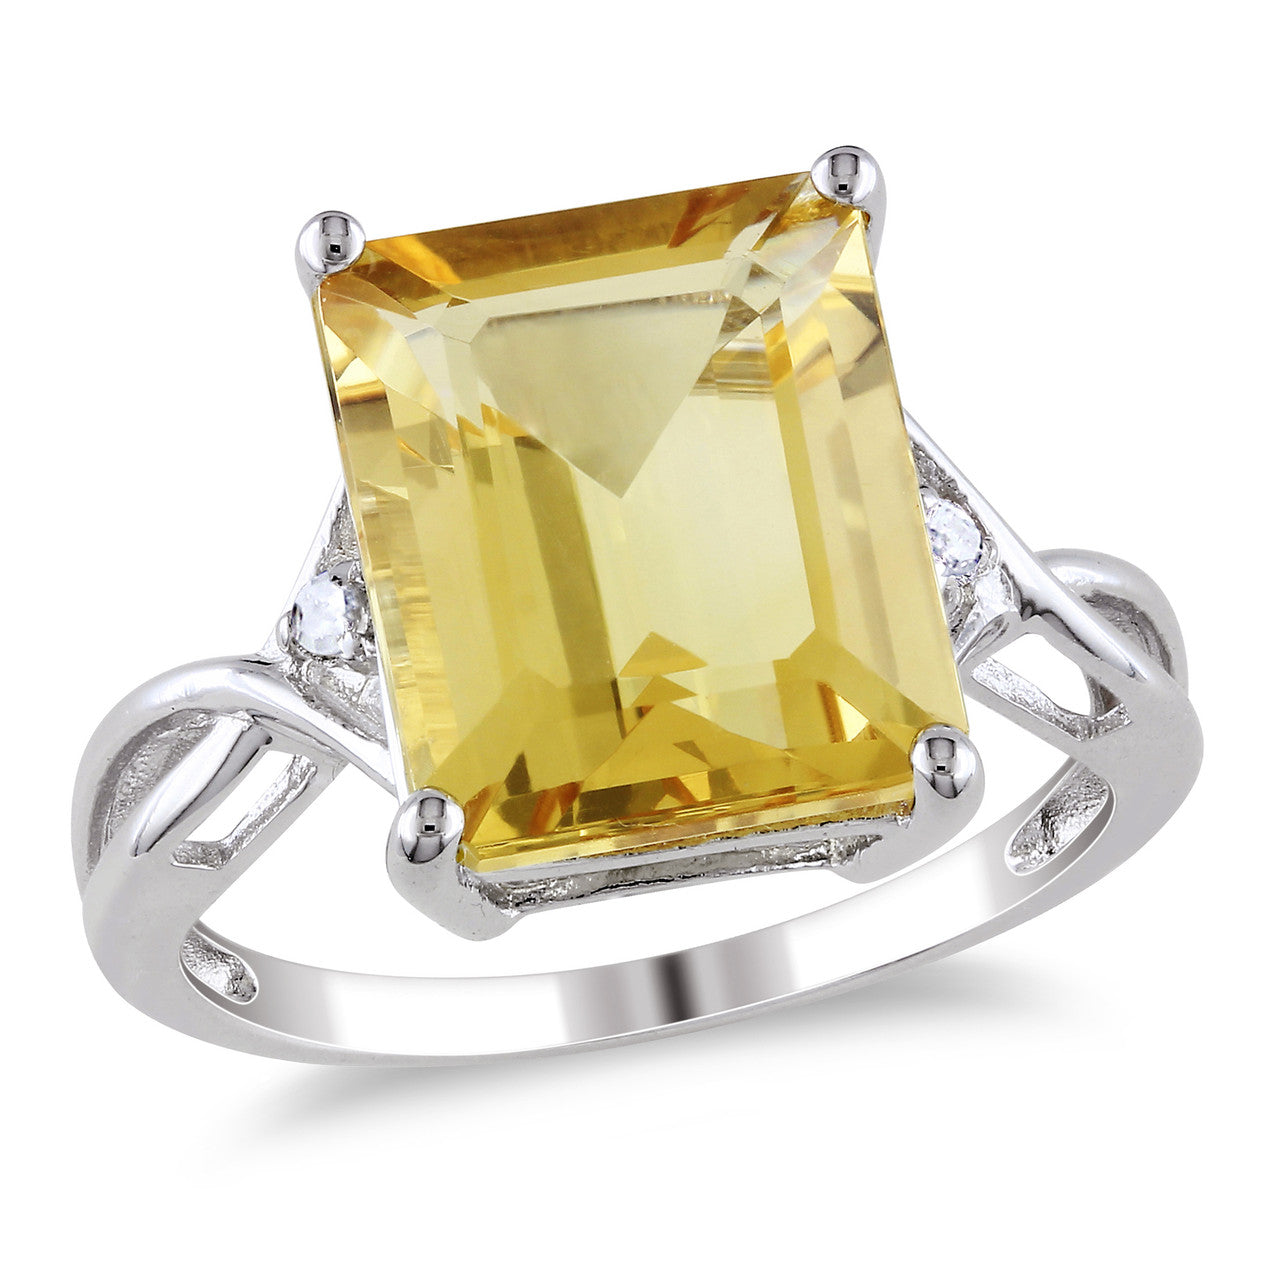 Ice Jewellery Citrine & White Topaz Cocktail Ring in Sterling Silver - 7500696191 | Ice Jewellery Australia